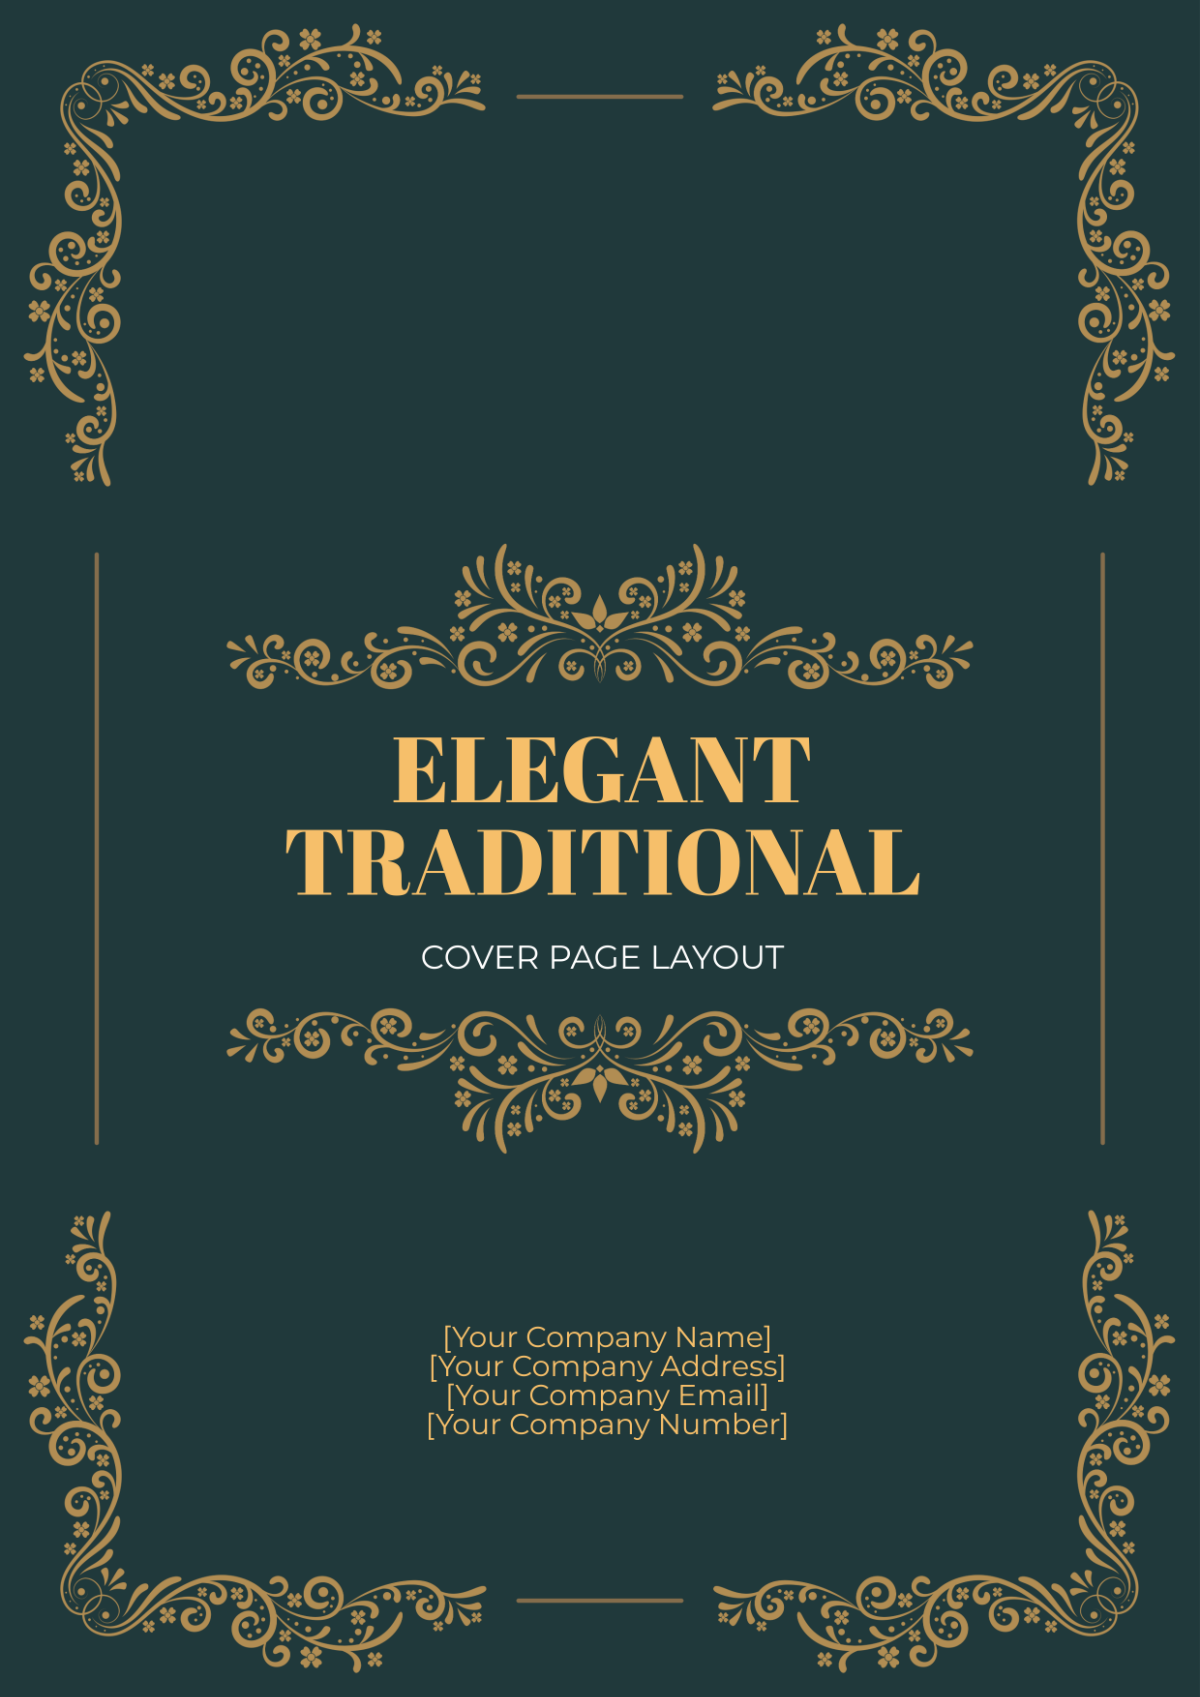 Elegant Traditional Cover Page Layout